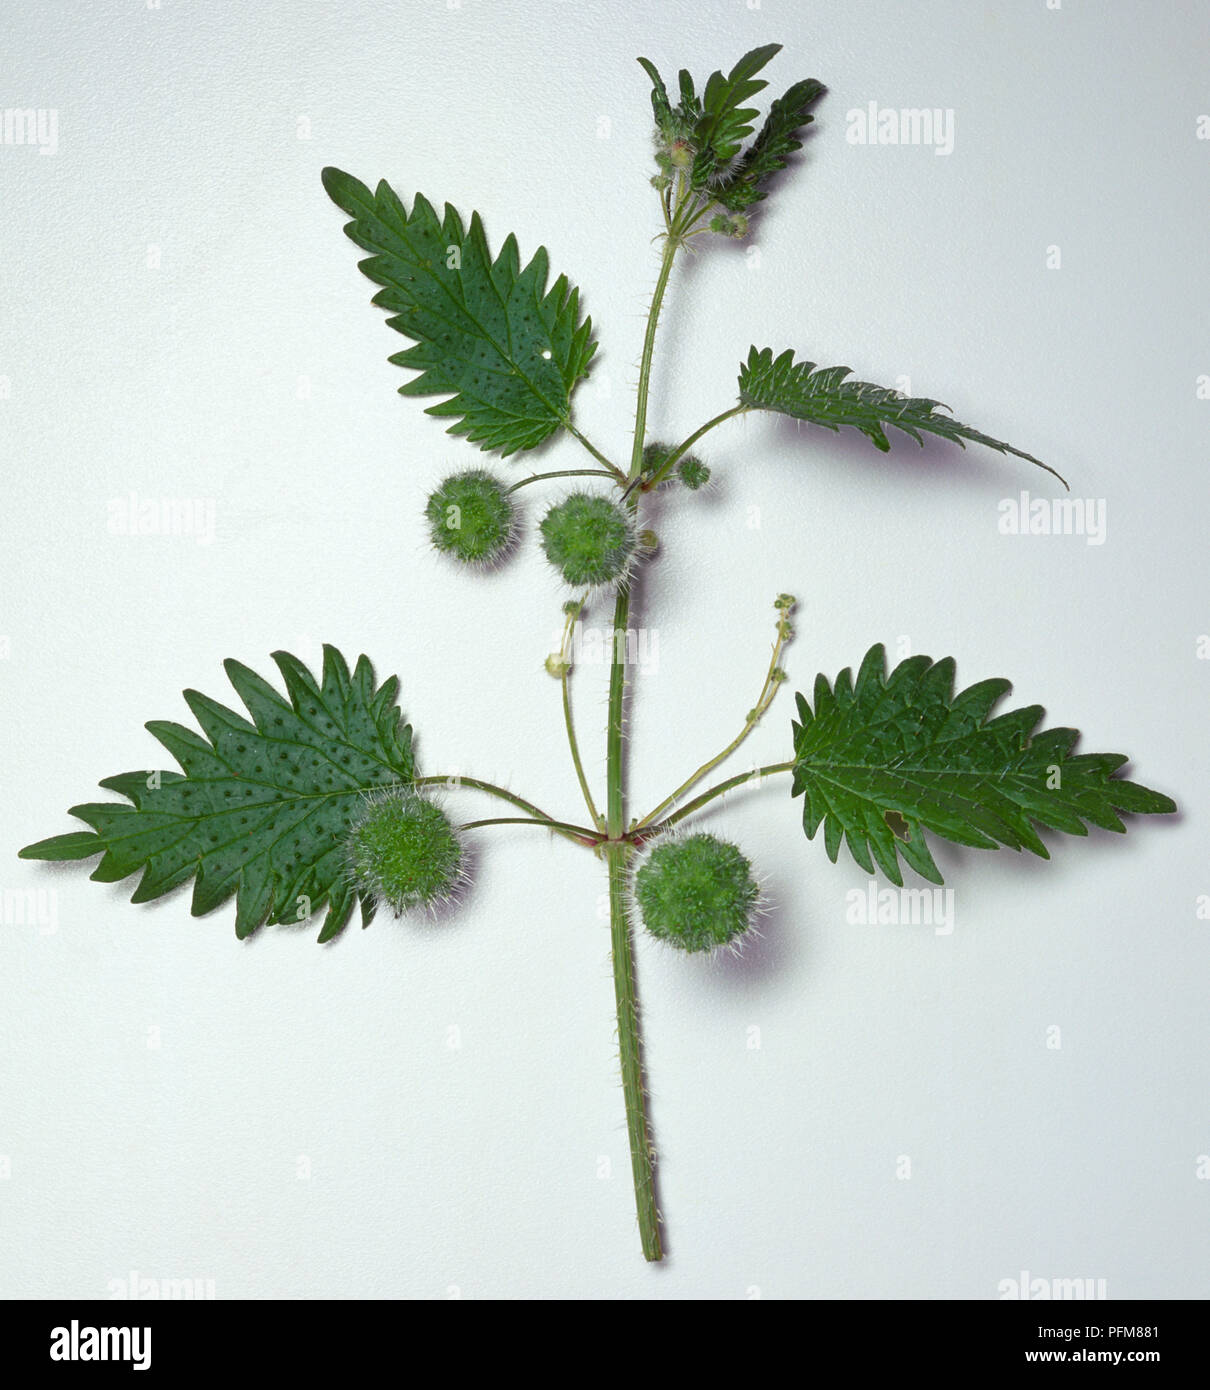 Urtica pilulifera, flowers of the roman nettle, bright green broad leaves with female ball-like flowers armed with stinging hairs and male spikes. Stock Photo